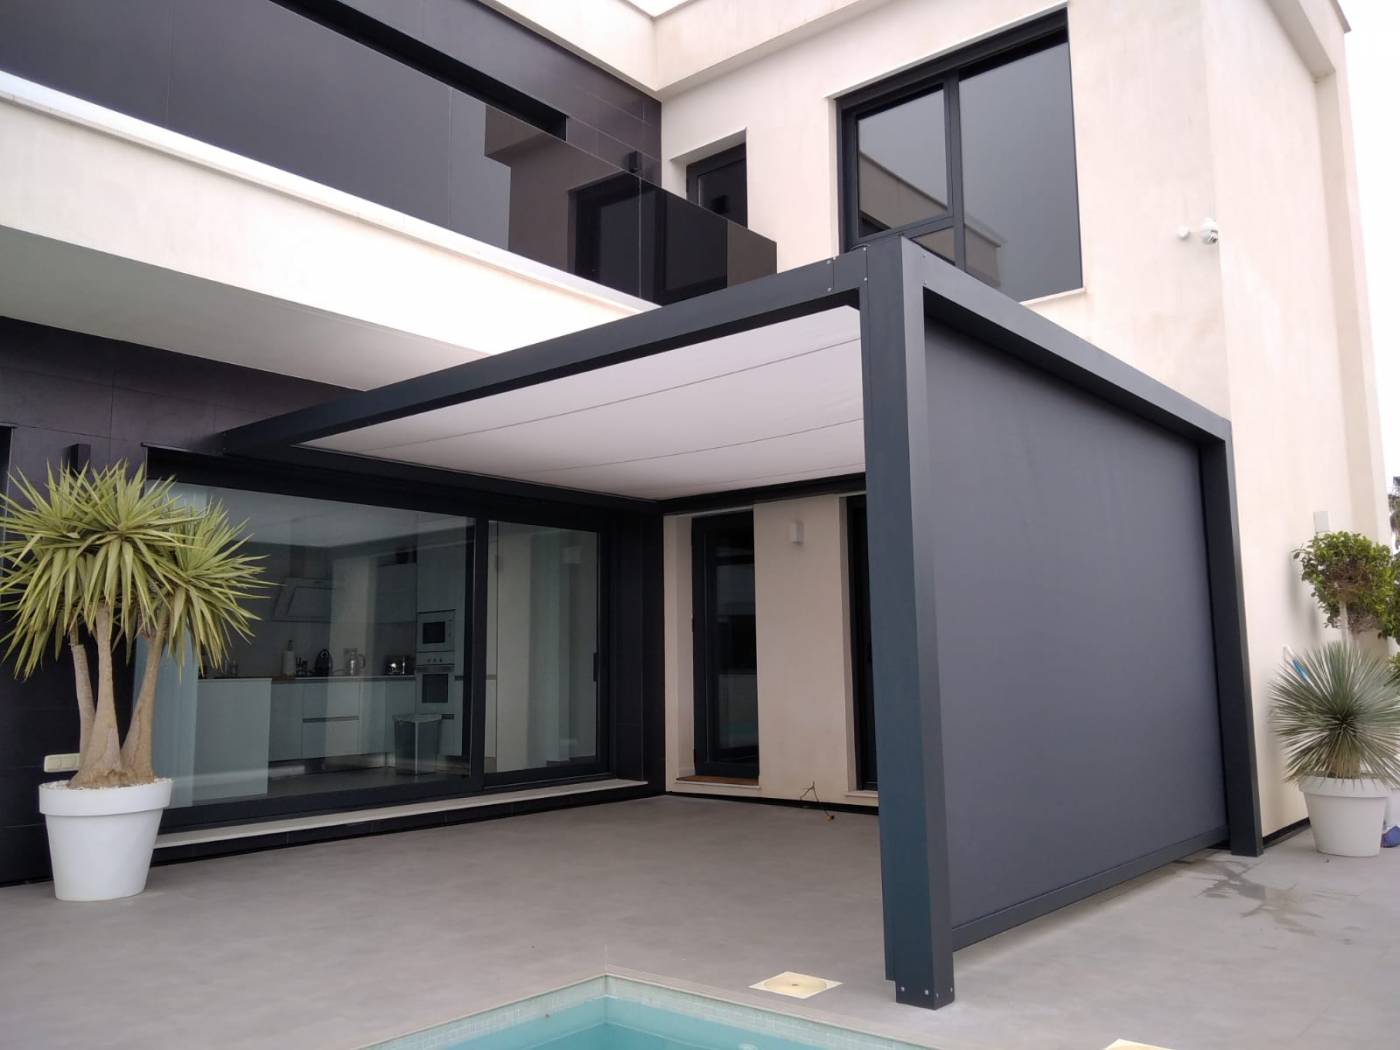 Tecnitoldo awnings, pergolas, coverings and sun control solutions in Murcia and Alicante